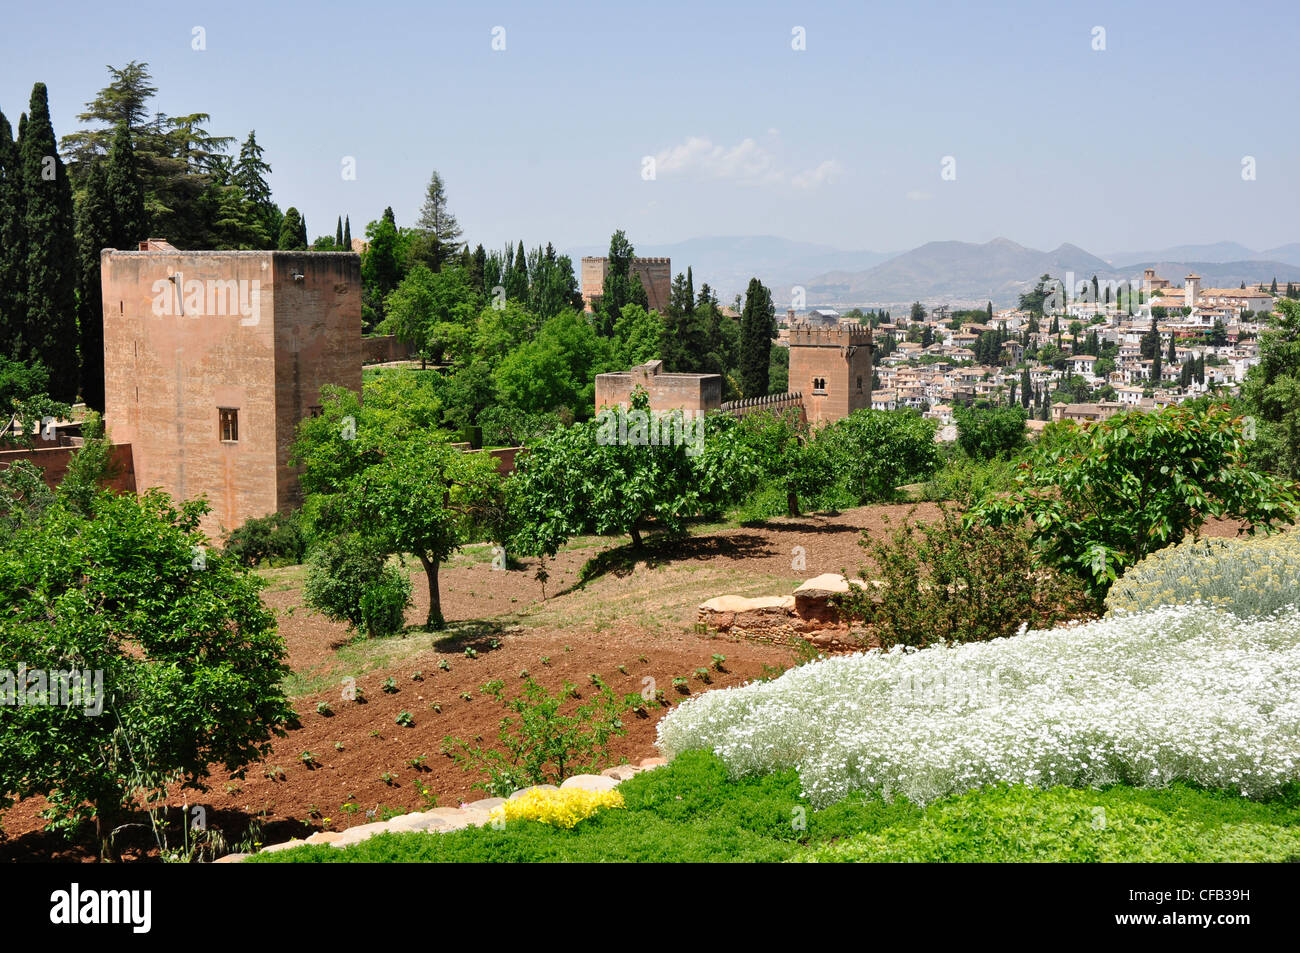 Spain - Andalucia - Granada - view over the gardens of the Alhambra Palace - backdrop of Granada old town and mountains beyond Stock Photo